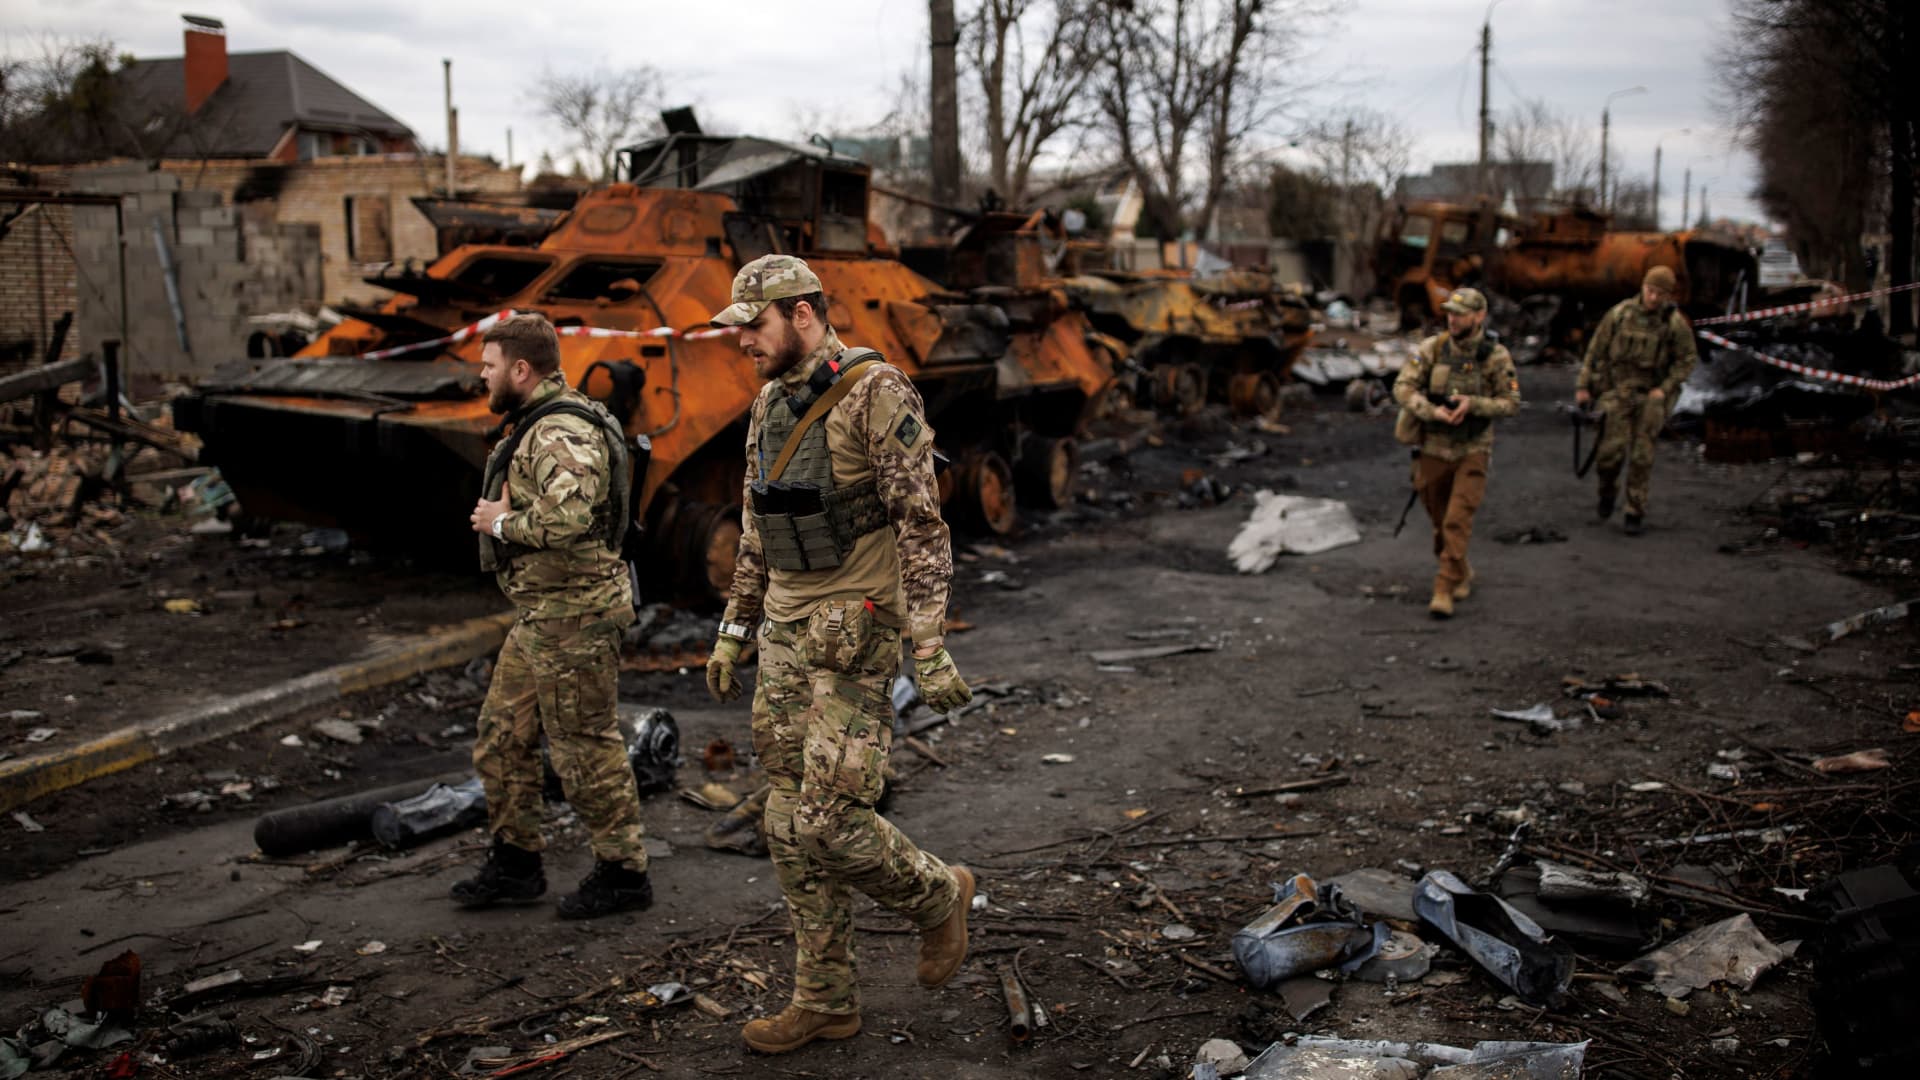 Ukrainian soldiers walk next to destroyed Russian tanks and armored vehicles, amid Russia's invasion of Ukraine, in Bucha, in Kyiv region, Ukraine, April 6, 2022.